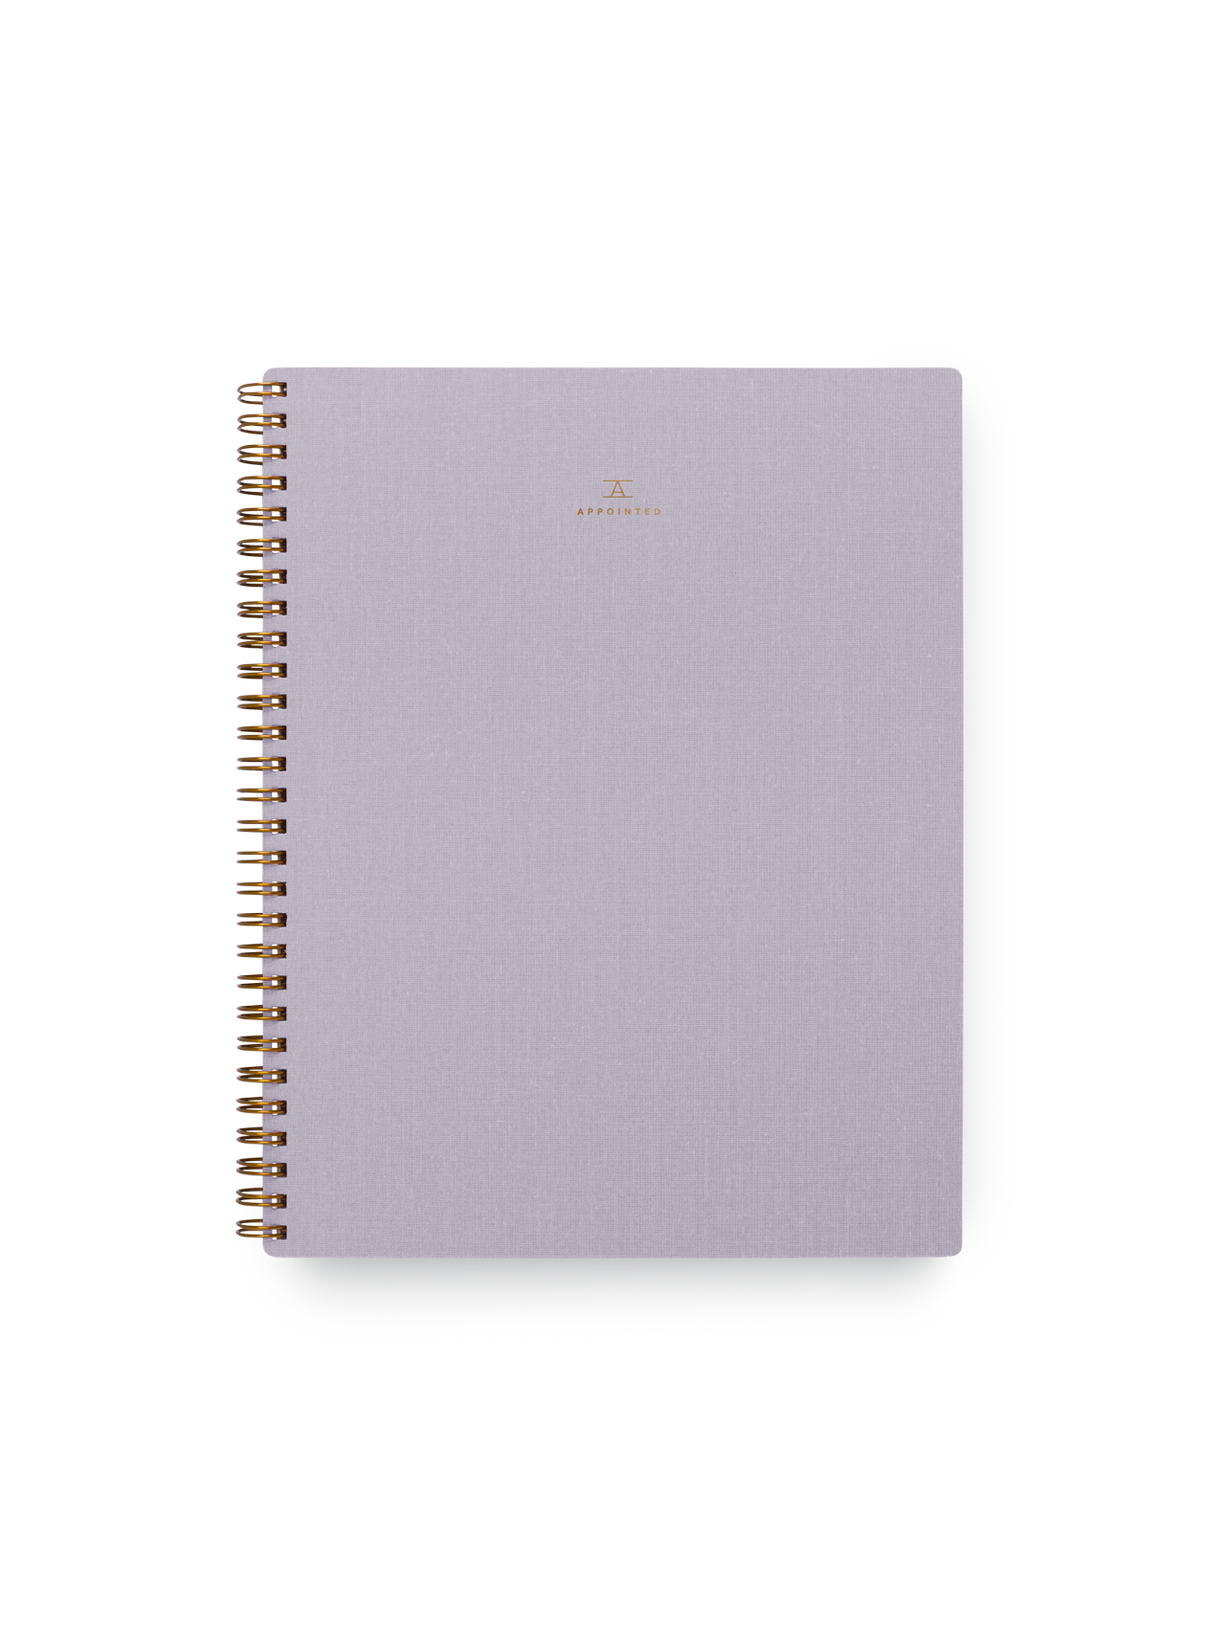 Appointed Notebook bookcloth with brass wire-o binding front view || Lavender Gray